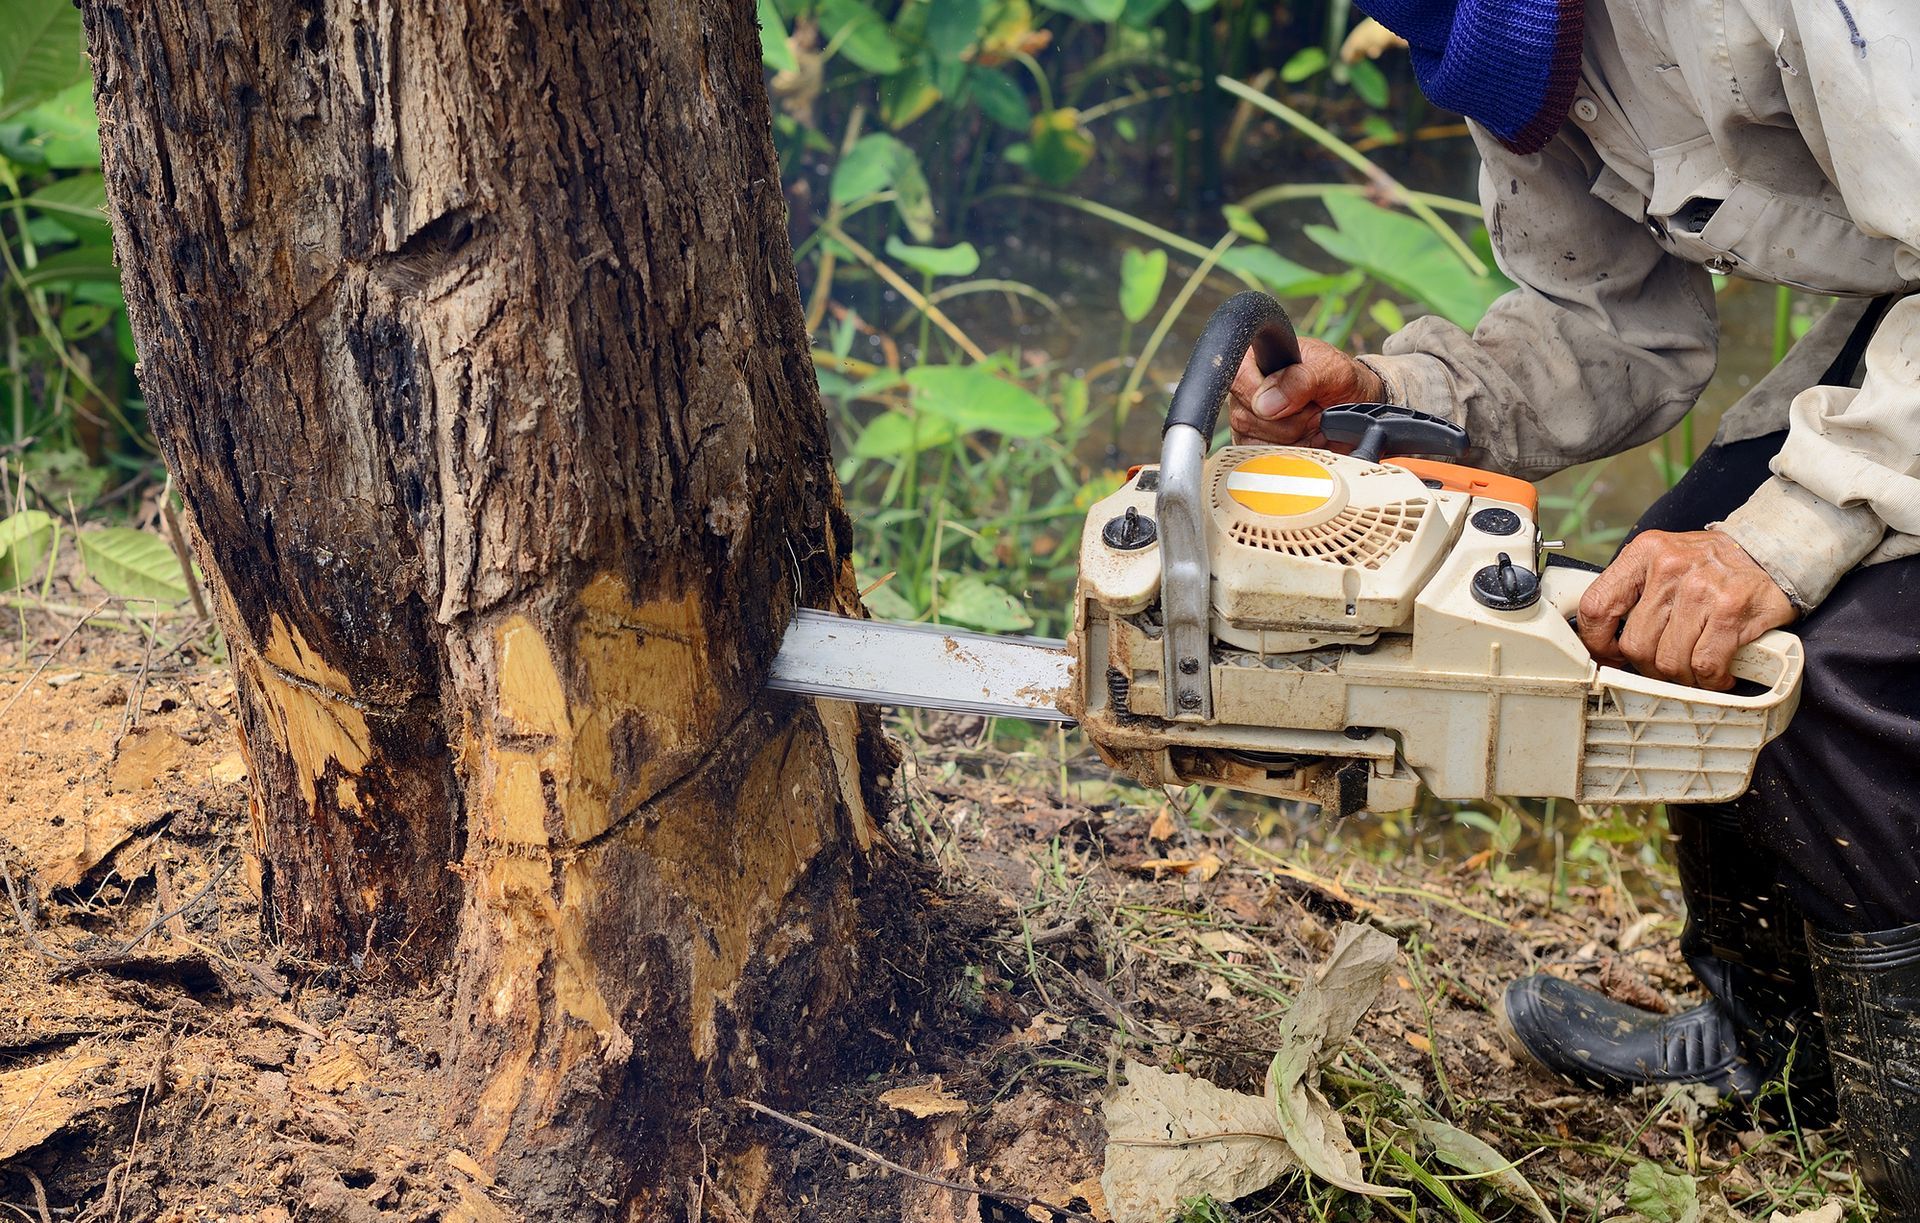 Stump and Tree Removal Service in Southampton, NJ | Edward and Sons Landscaping